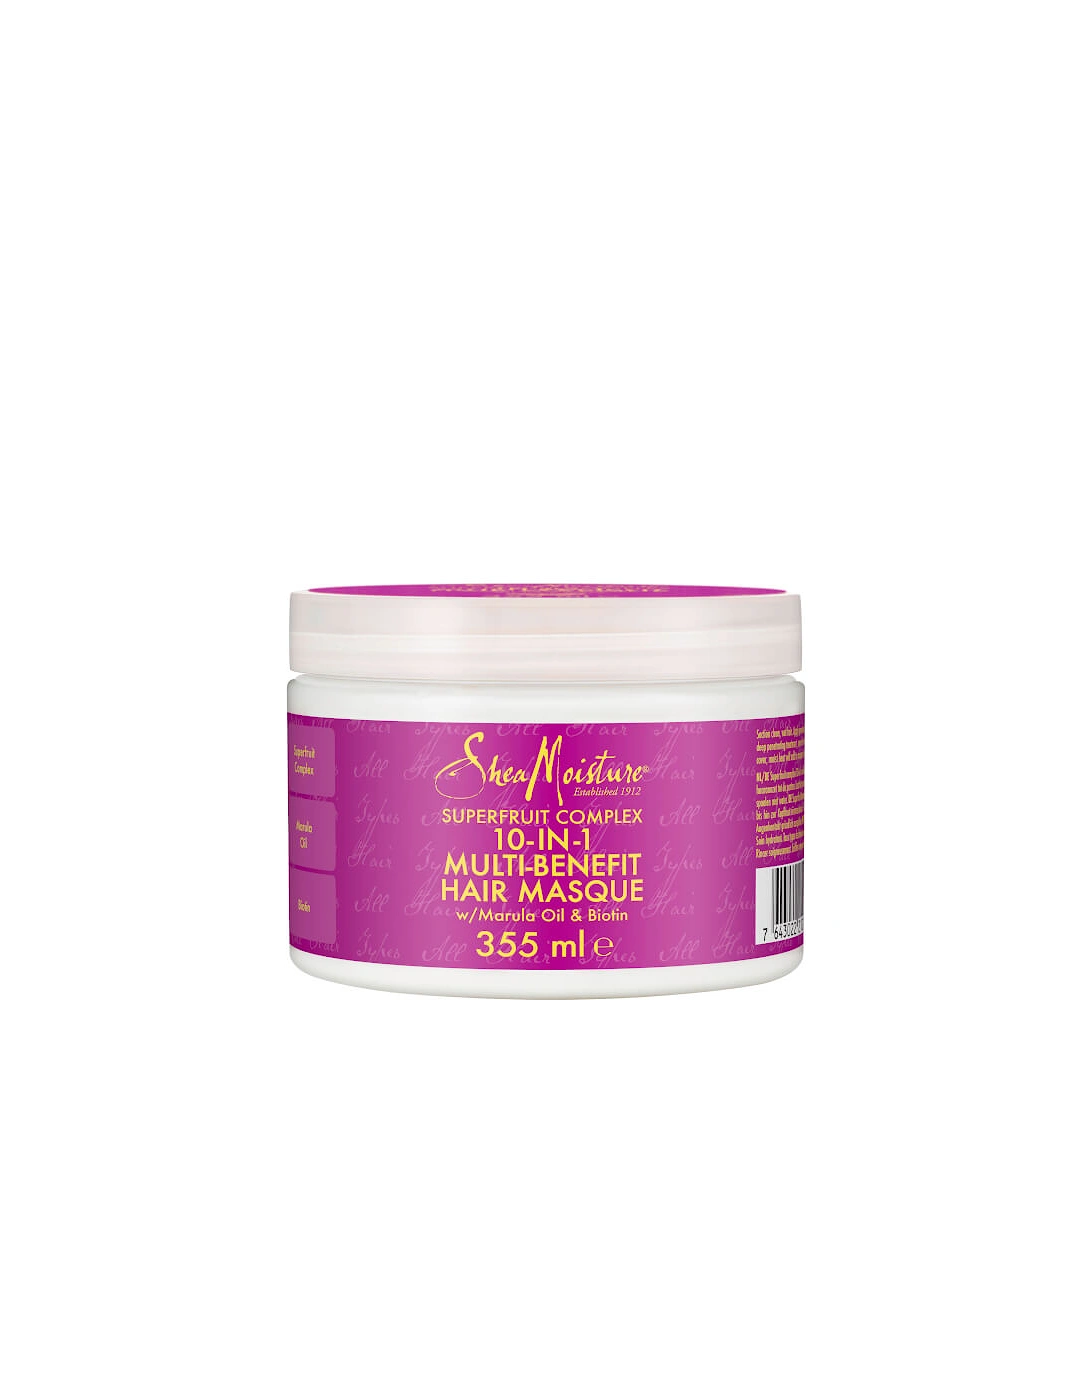 Superfruit Complex 10 in 1 Renewal System Hair Masque 355ml - SheaMoisture, 2 of 1